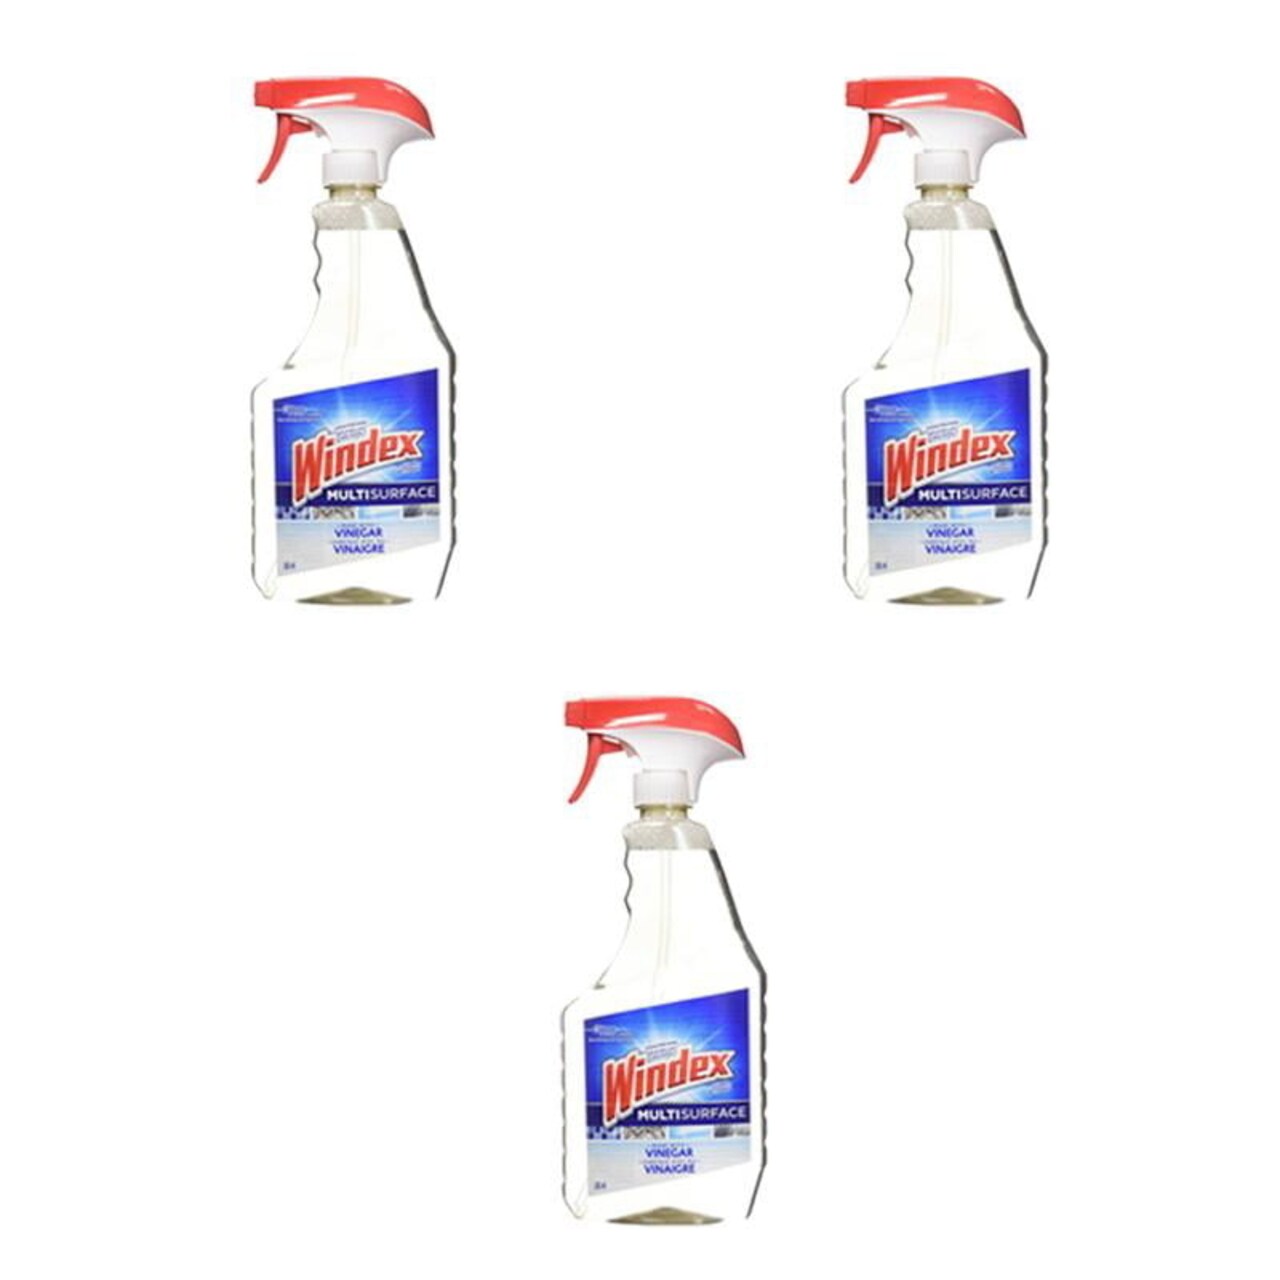 Windex Multi-Surface Cleaner with Vinegar - 765mL (Pack of 3